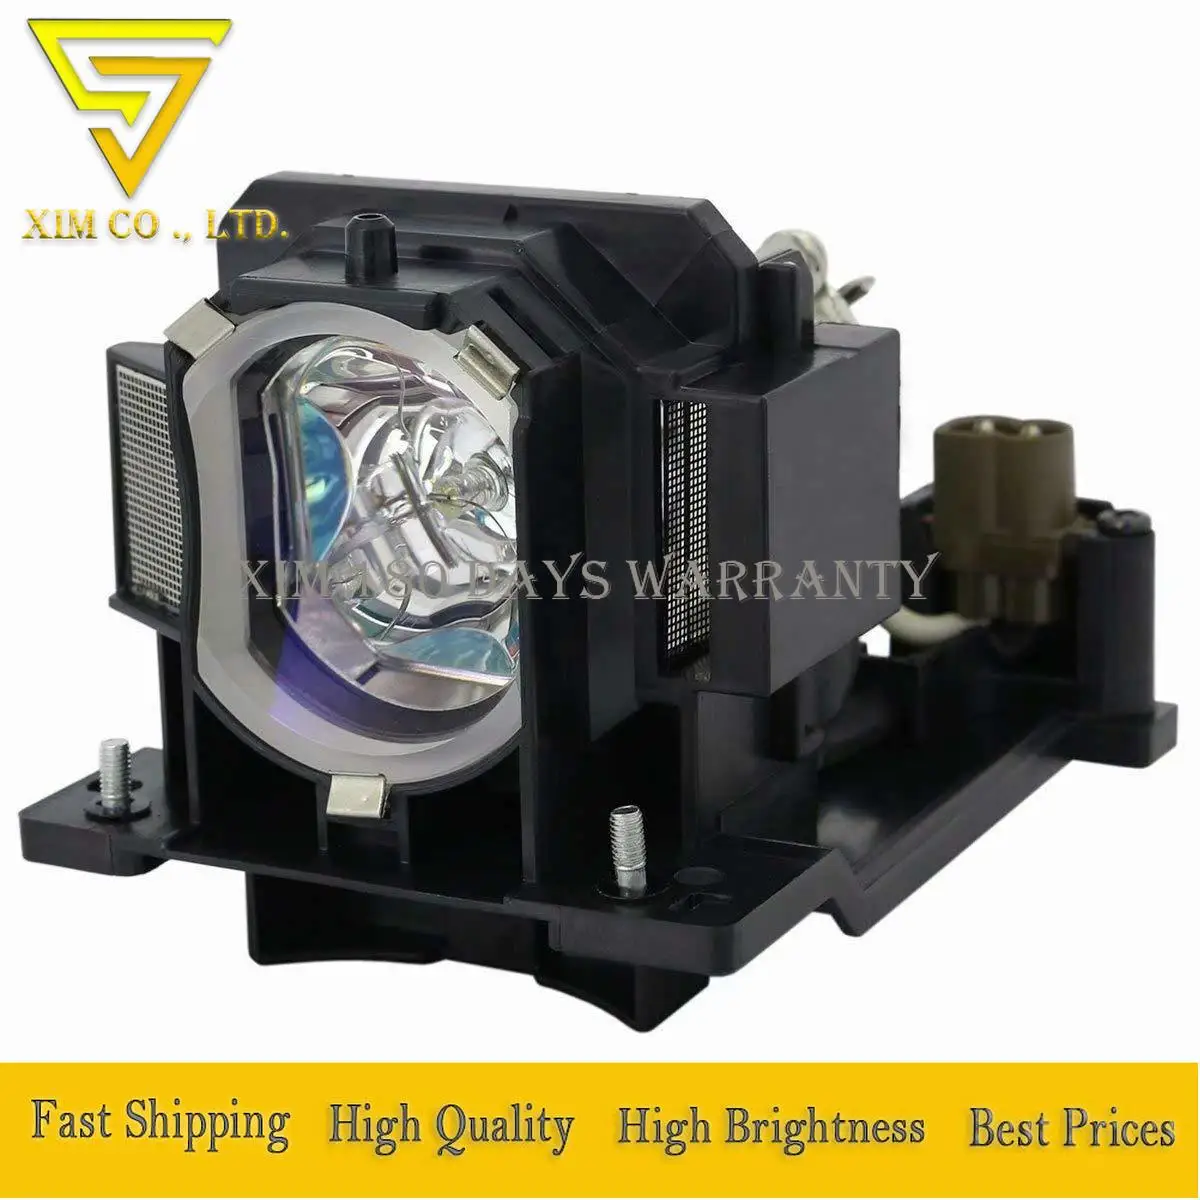 DT01091 Projector Lamp For Hitachi CP-AW100N CP-D10 CP-DW10 ED-AW100N ED-AW110N HCP-Q3 HCP-Q3W CP-DW1 high quality With Housing